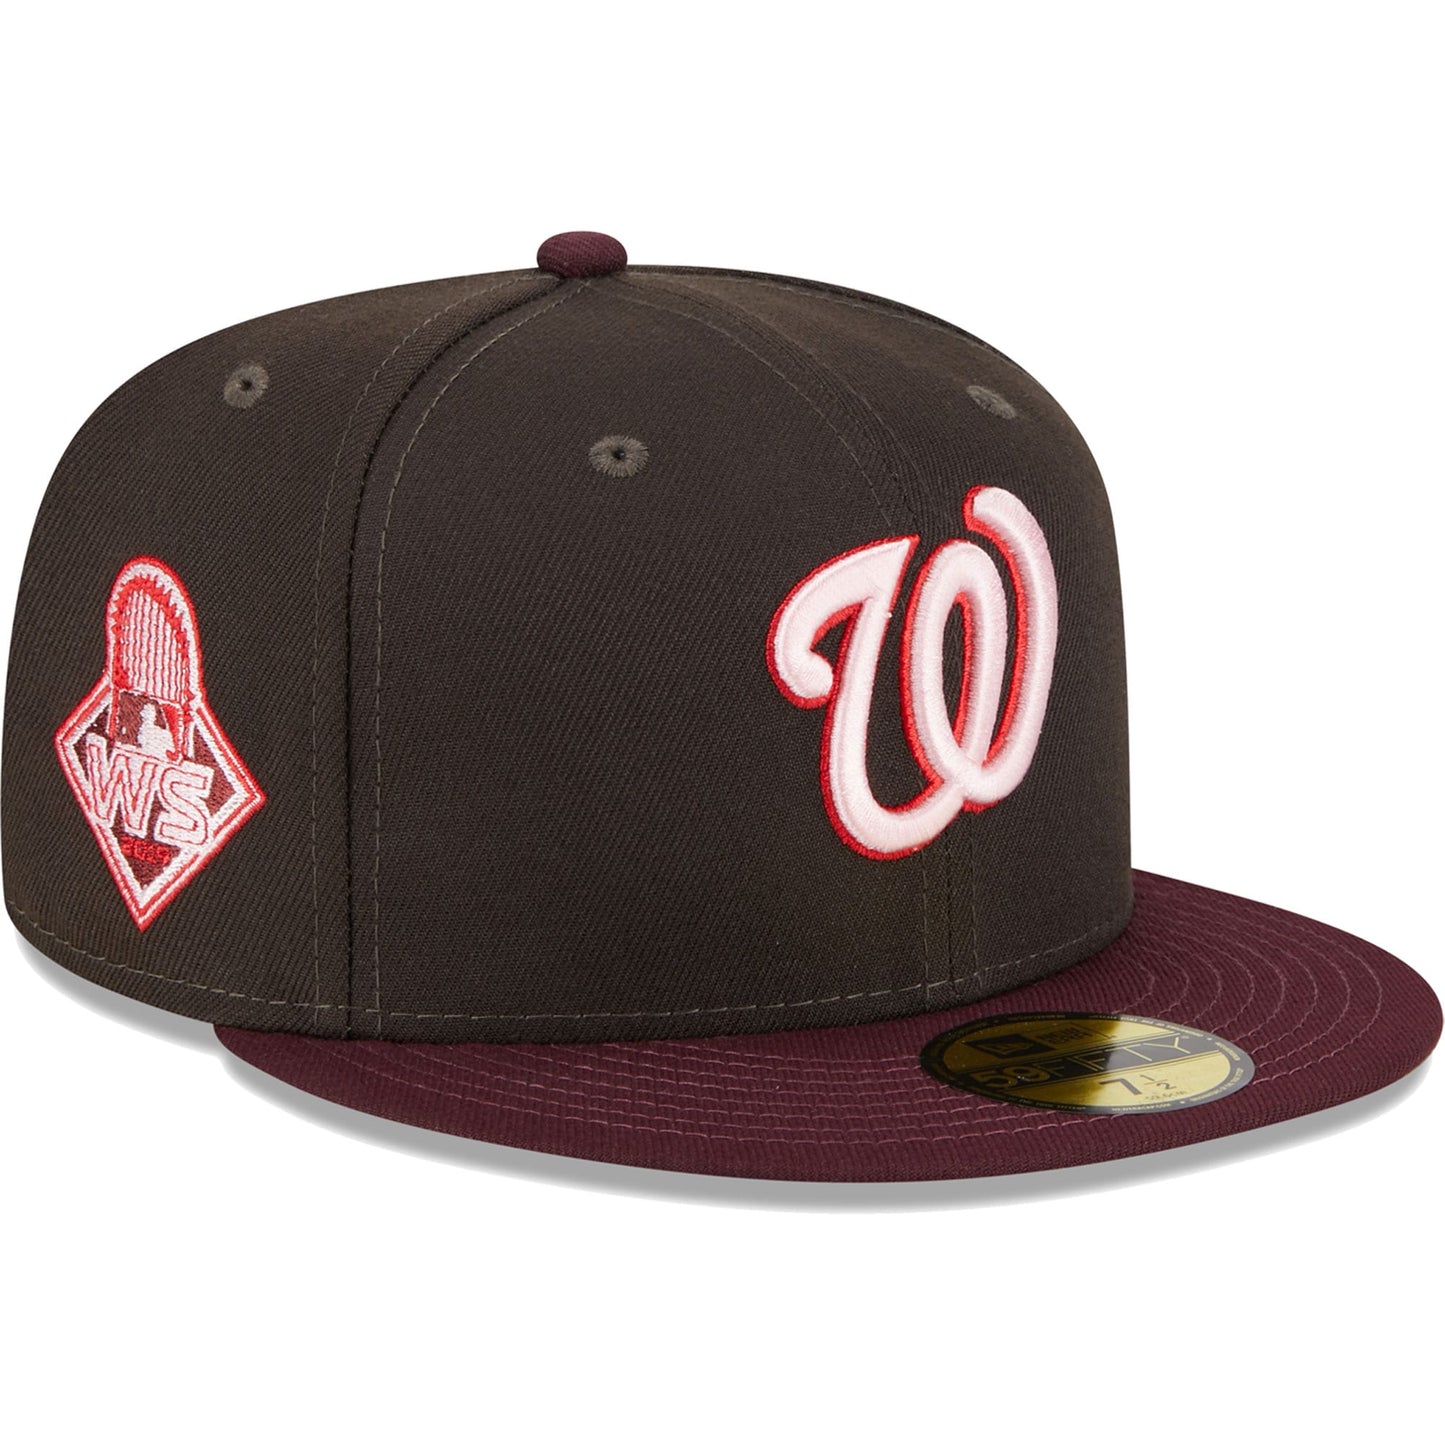 Washington Nationals New Era Chocolate Strawberry 59FIFTY Fitted Hat - Brown/Maroon